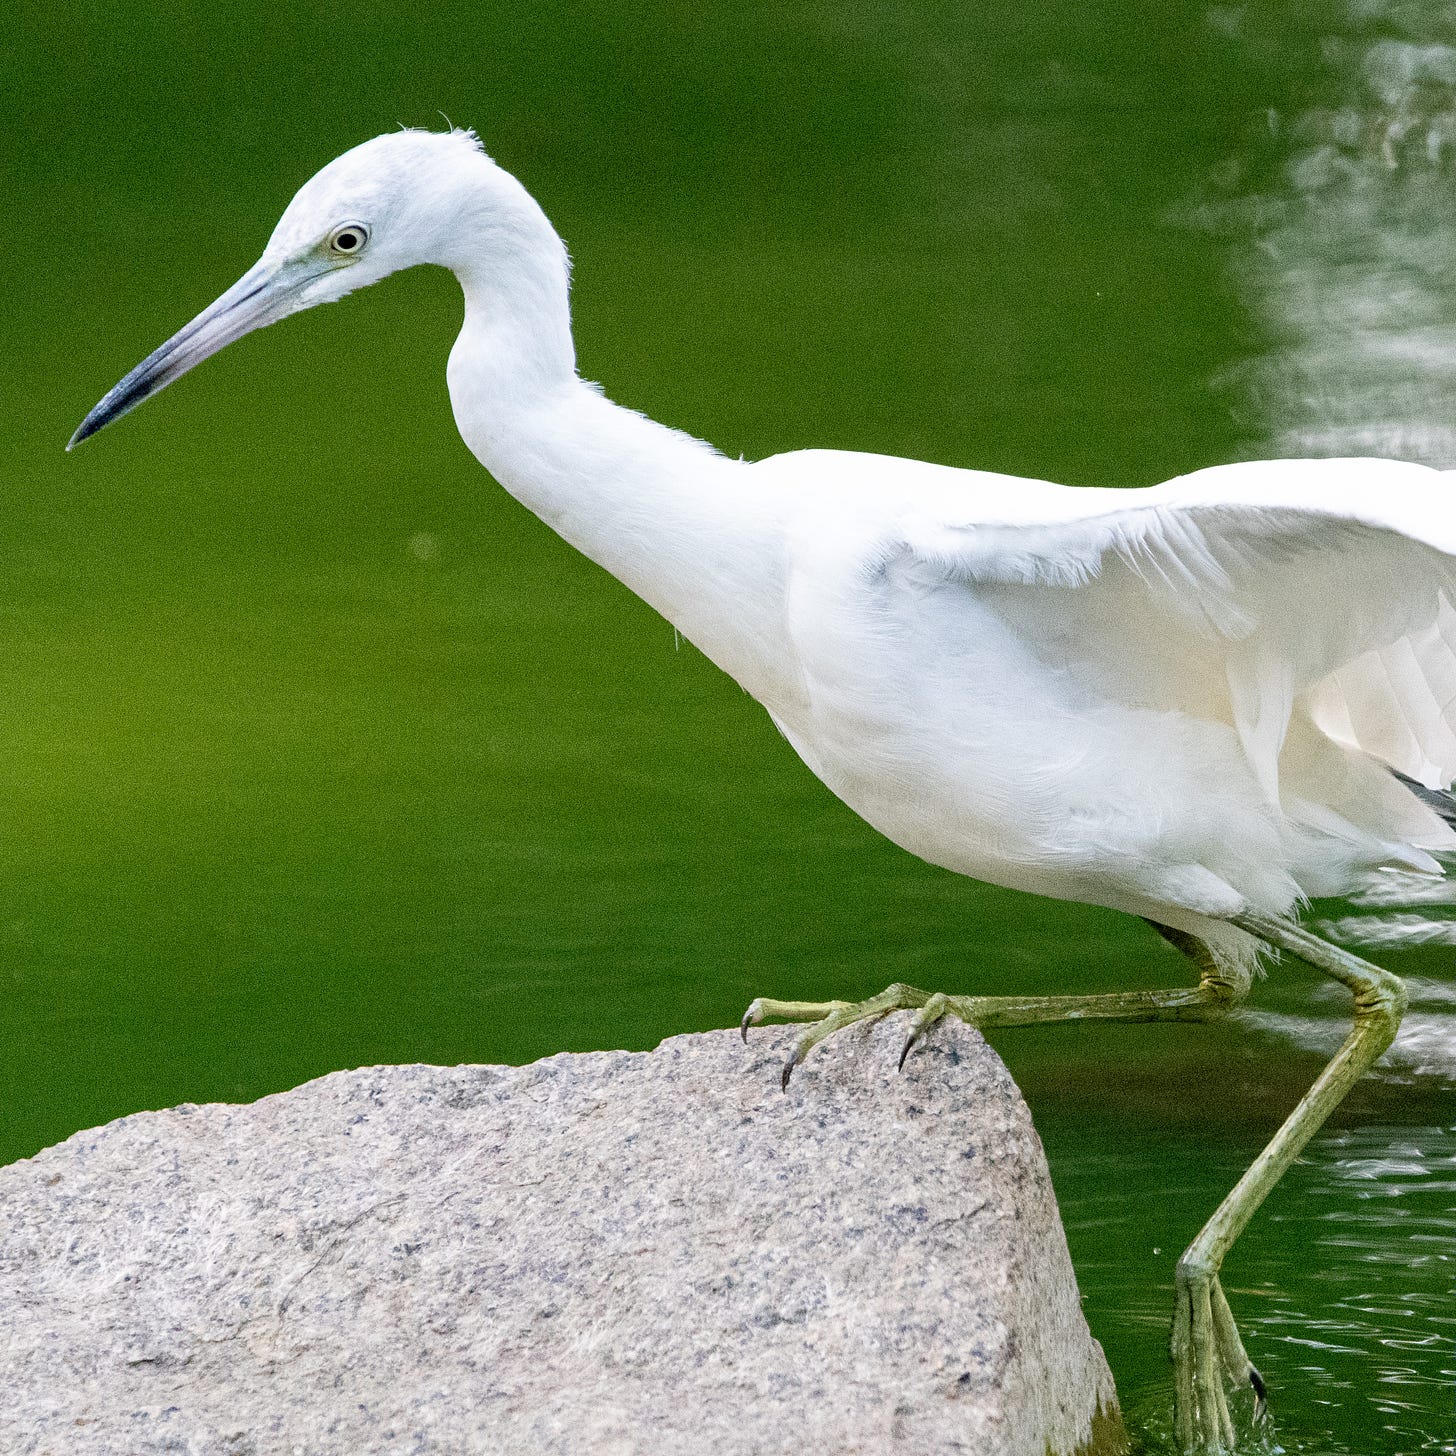 A little blue heron gingerly steps up onto a rock in standing water